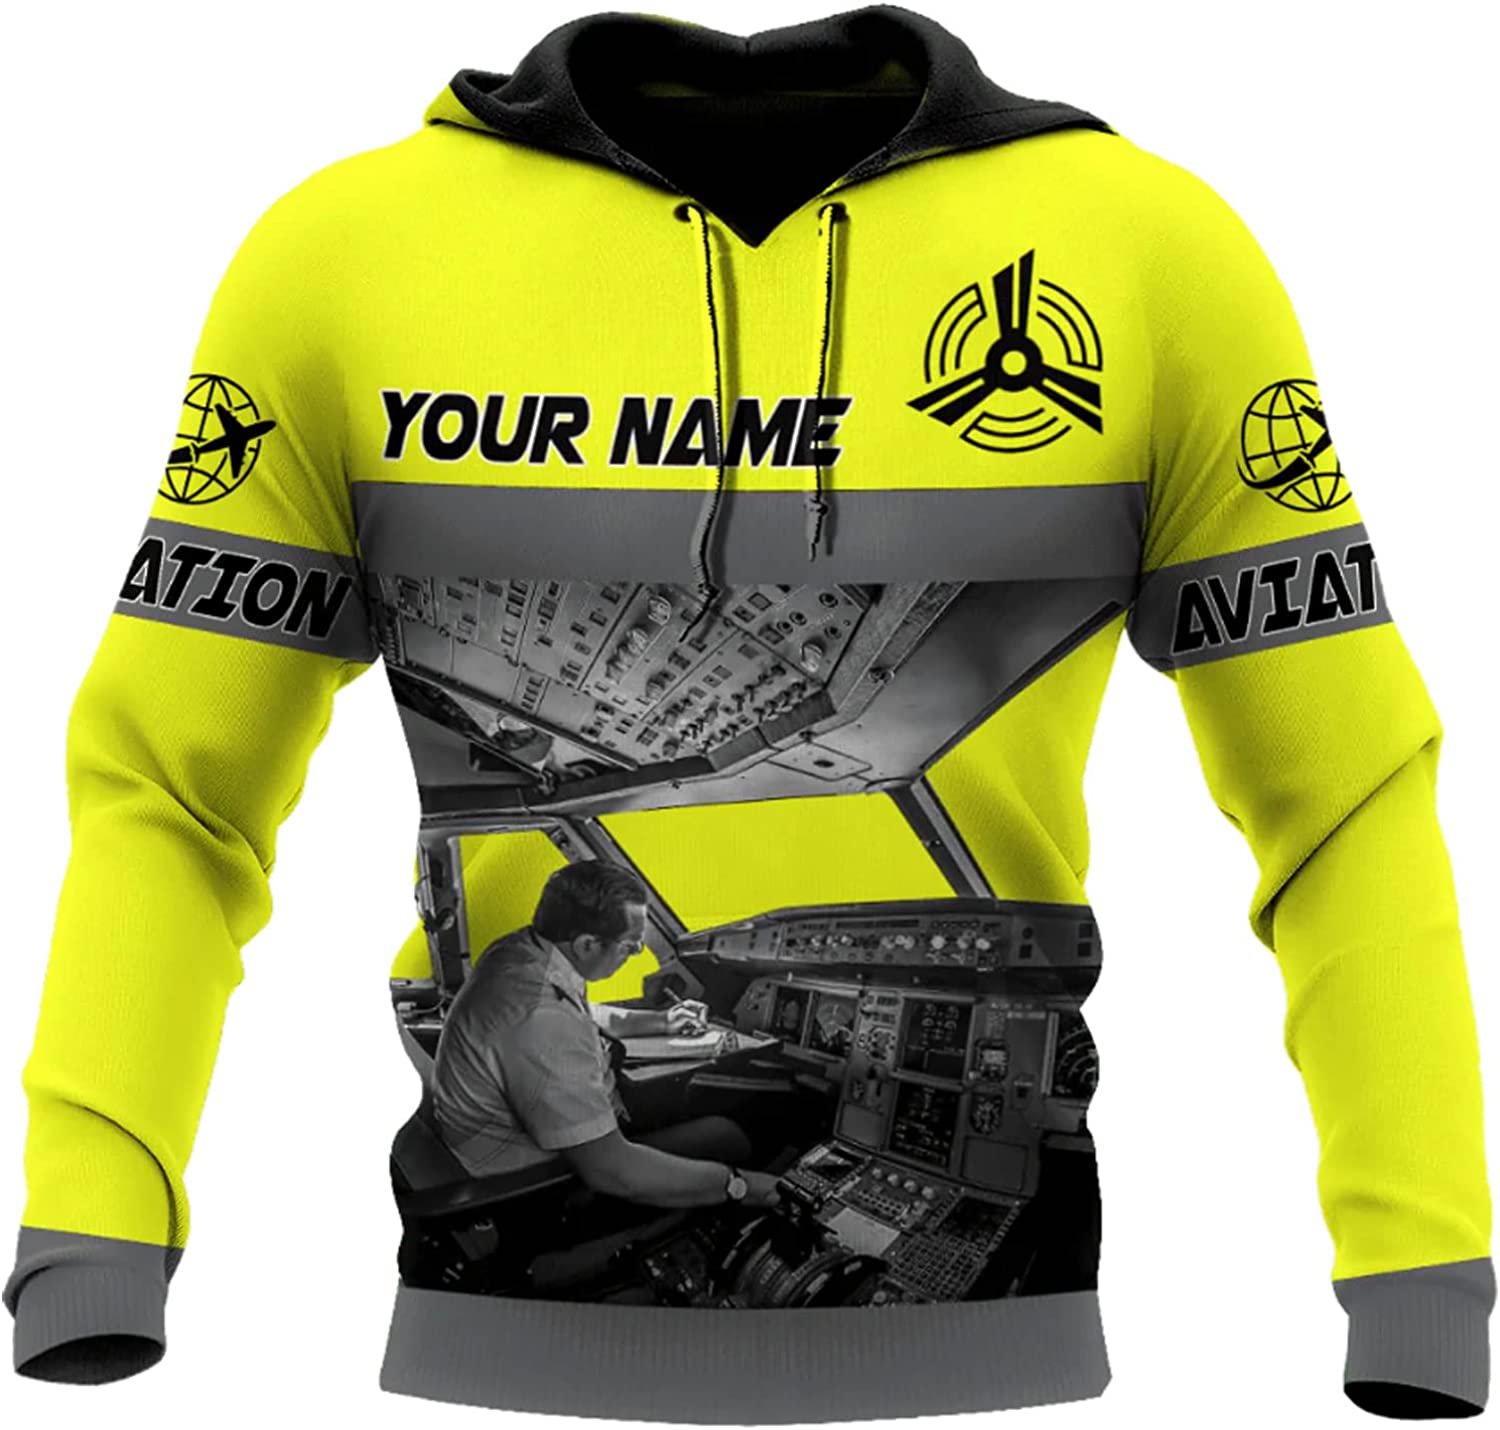 personalized aviation shirts with 3d printing the perfect gift for aviation enthusiasts! choose from hawaiian shirts sweatshirts hoodies and zip hoodies with multicolor over printing. jot1440 9m9ya